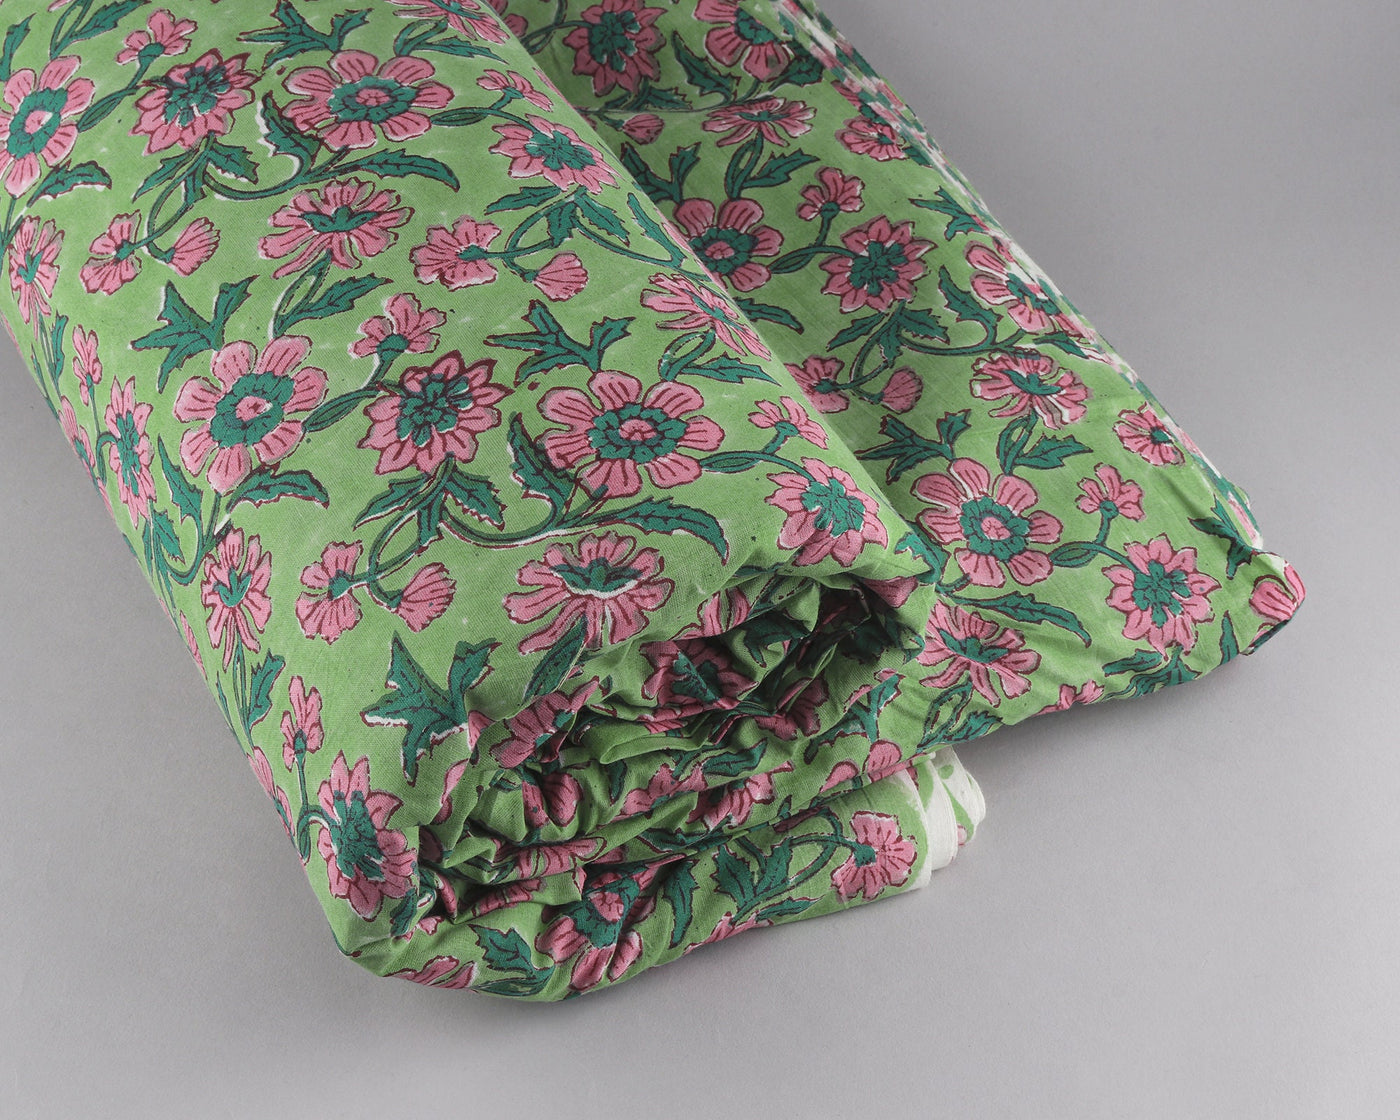 Mint and Pine Green, Salmon Pink Indian Floral Hand Block Printed 100% Pure Cotton Cloth, Fabric by the yard, Women's Clothing Curtains Bags